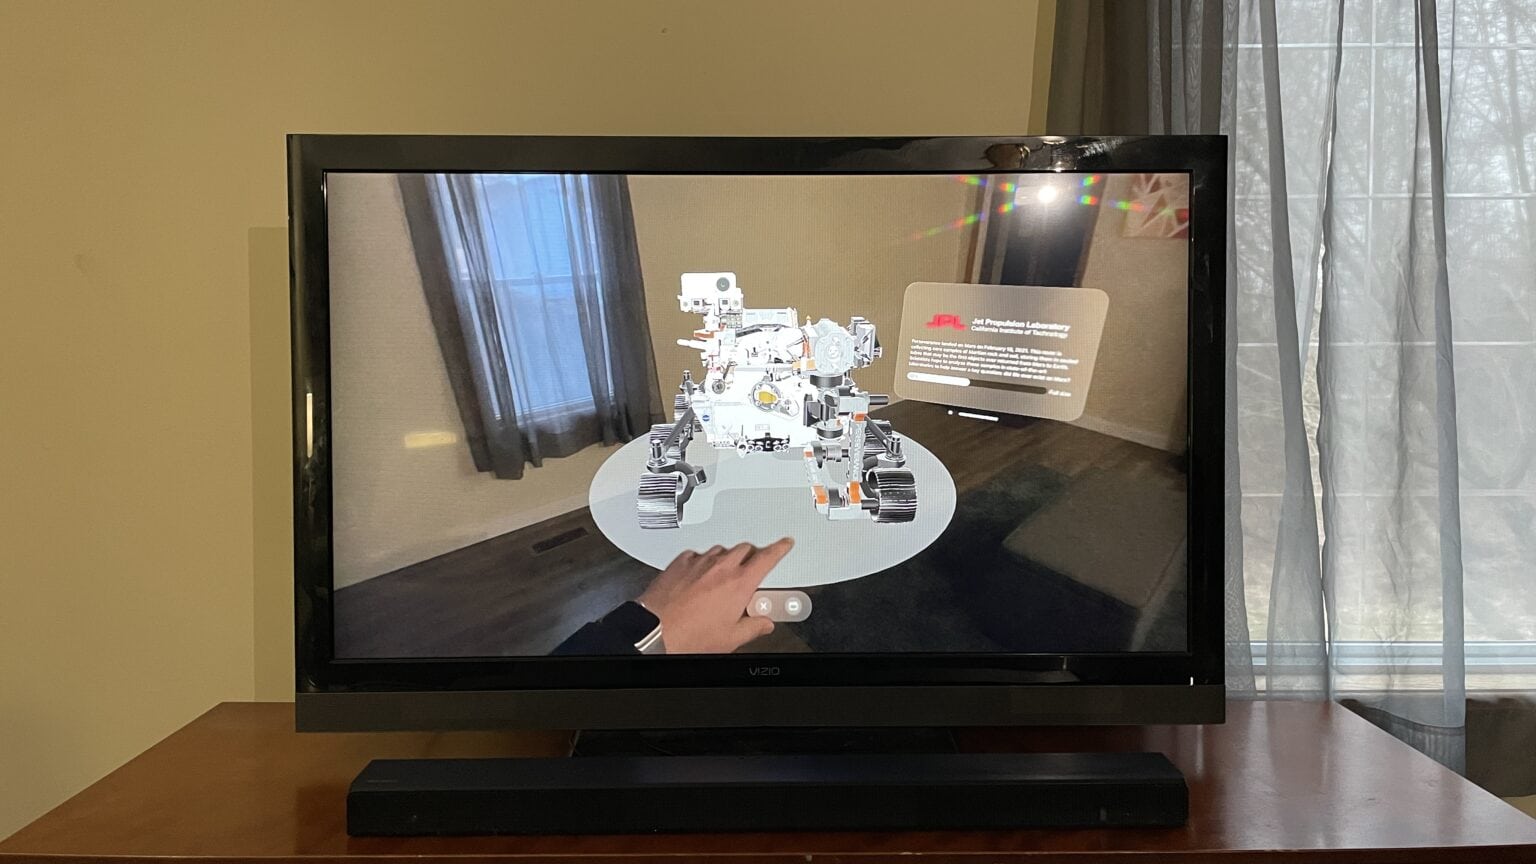 Apple TV showing a screen mirrored Vision Pro with the Explore Mars app